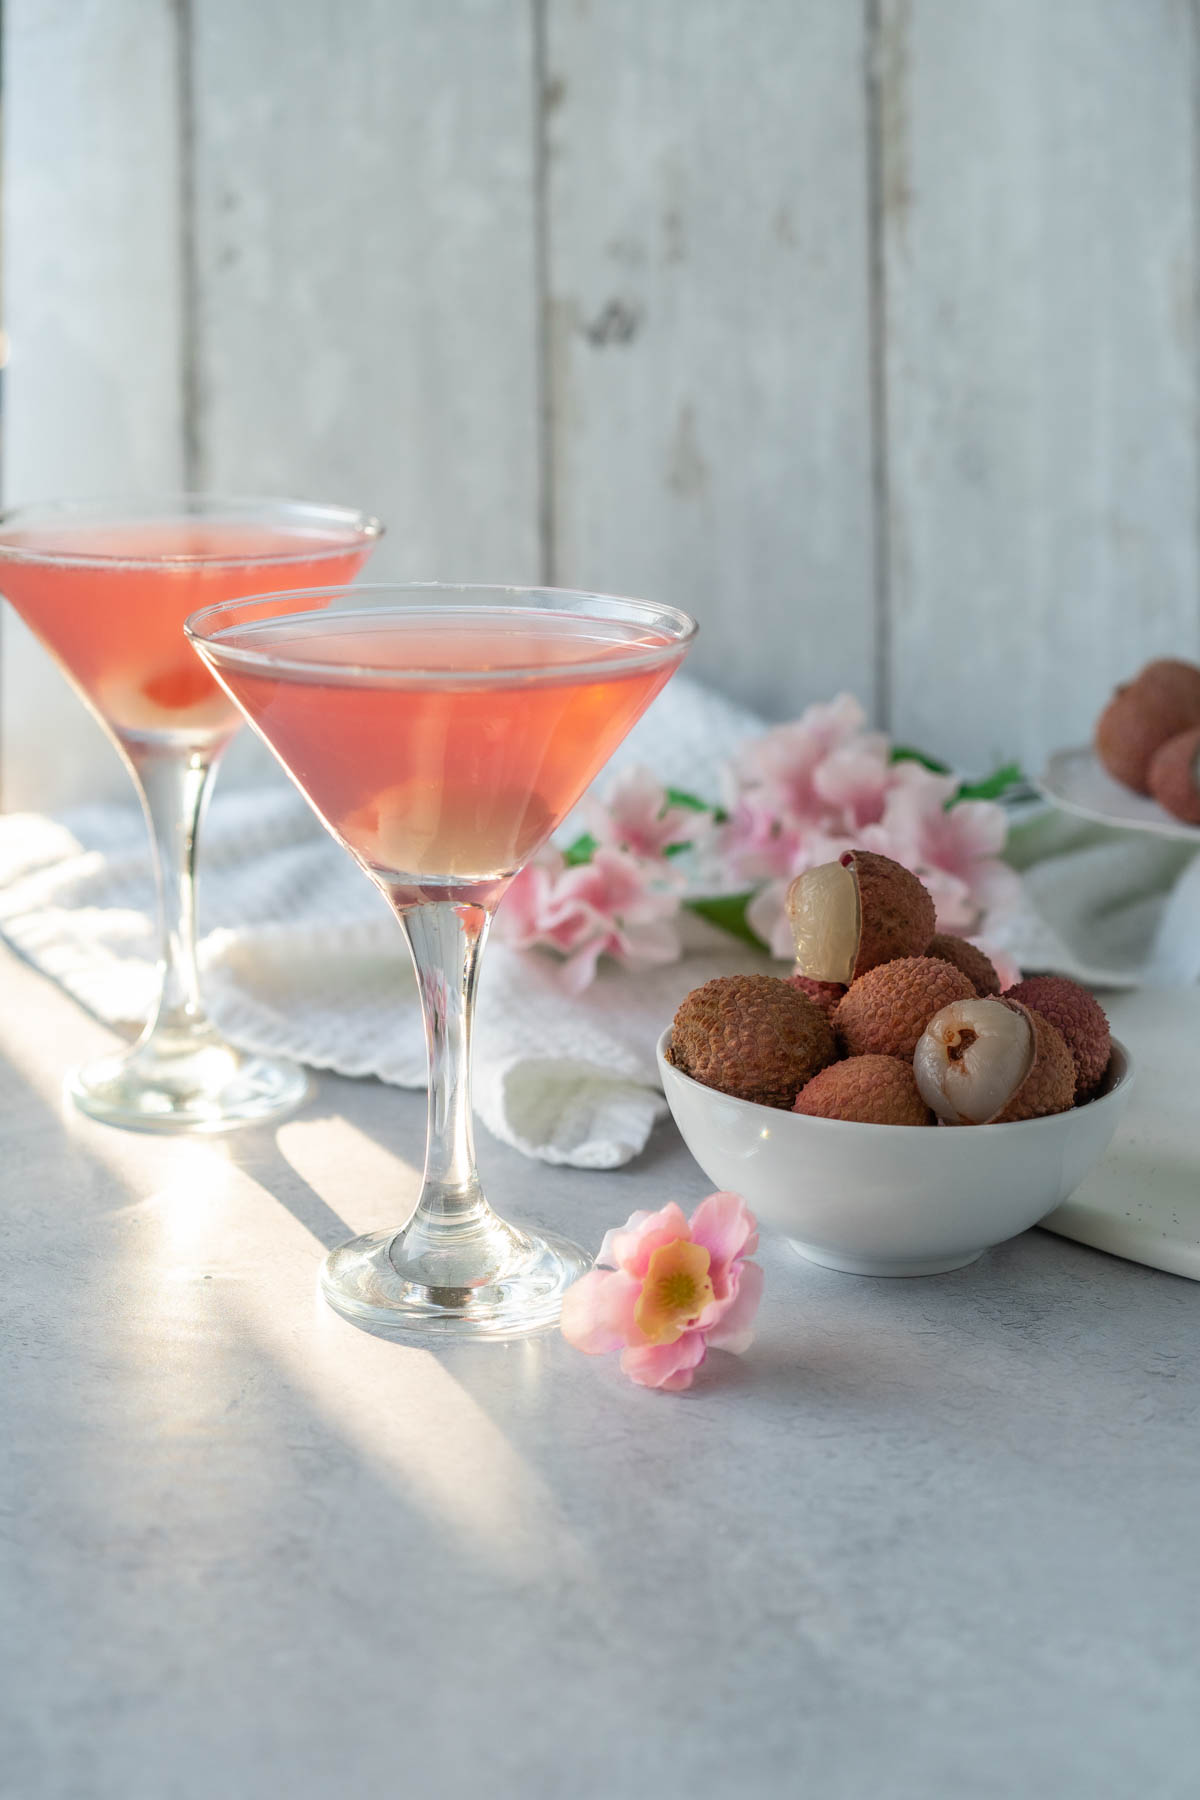 two martini glasses against a white background decorated with pale pink flowers and a bowl of lychee fruit; each glass is filled with a pale pink drink and garnished with a lychee